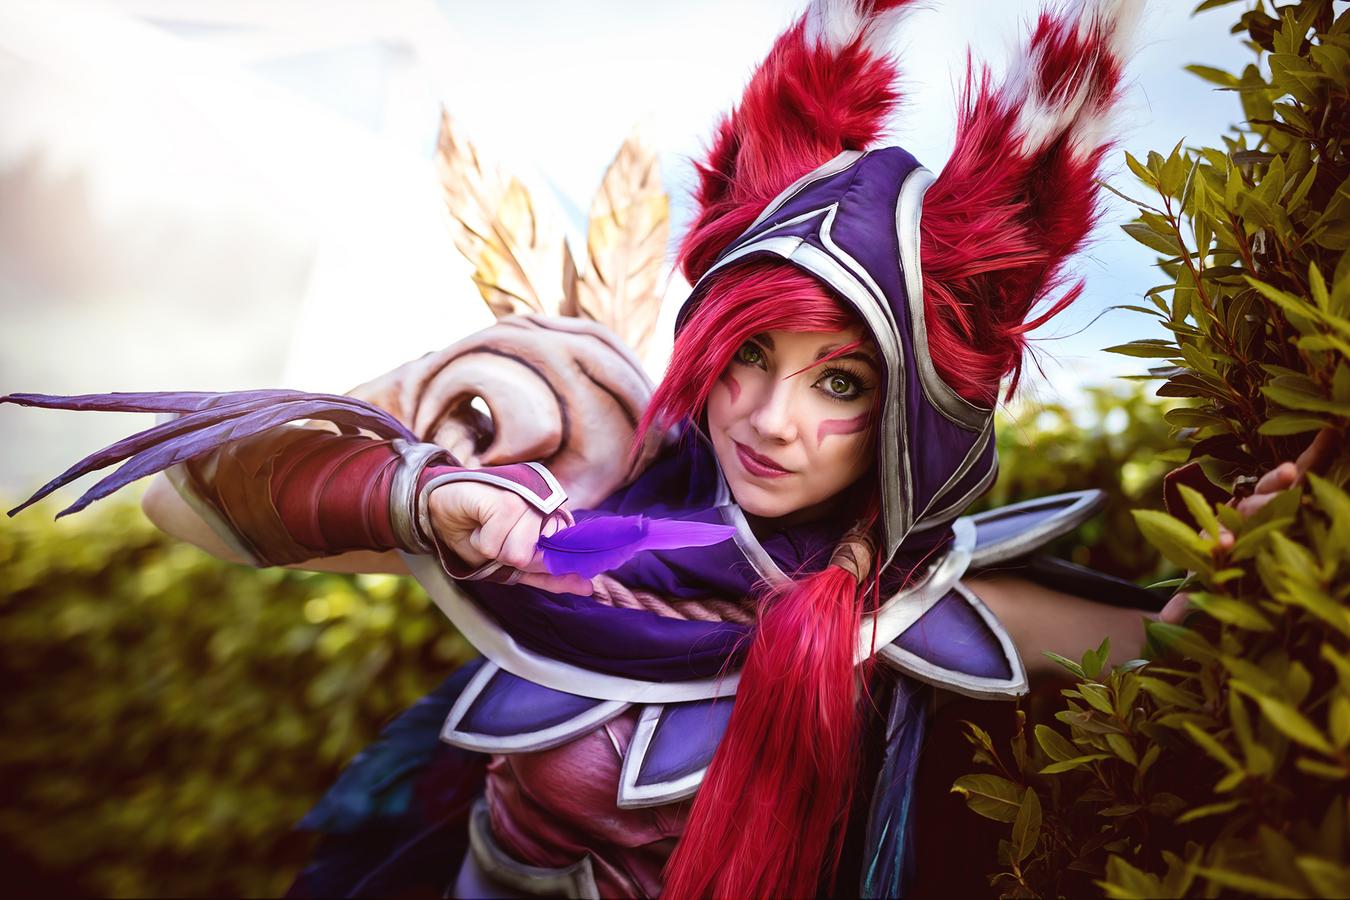 Britain’s League Of Legends Cosplay Is *Chef Kisses Fingers*